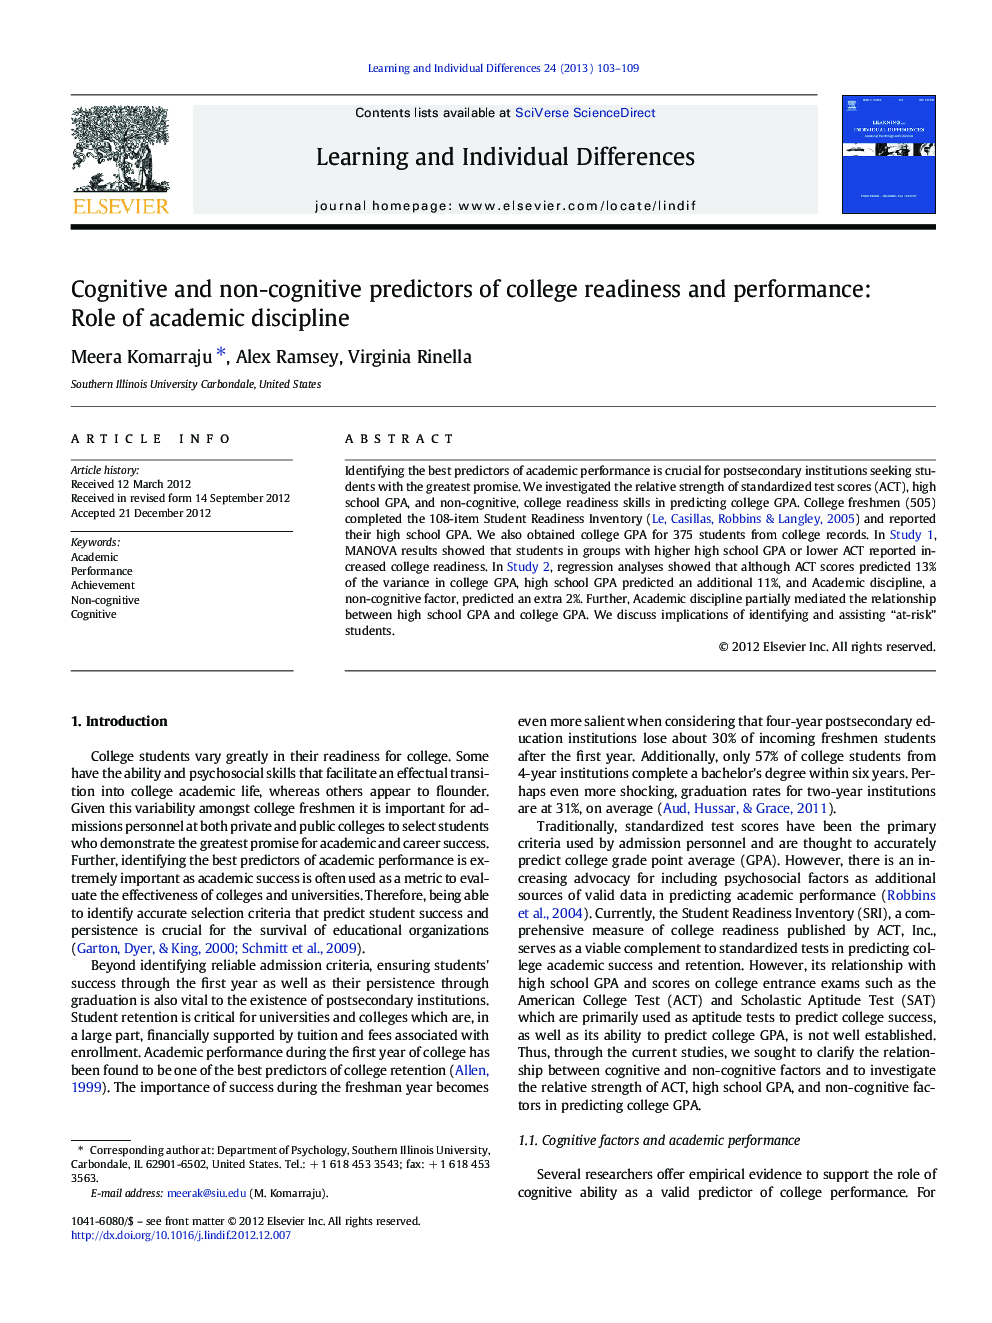 Cognitive and non-cognitive predictors of college readiness and performance: Role of academic discipline